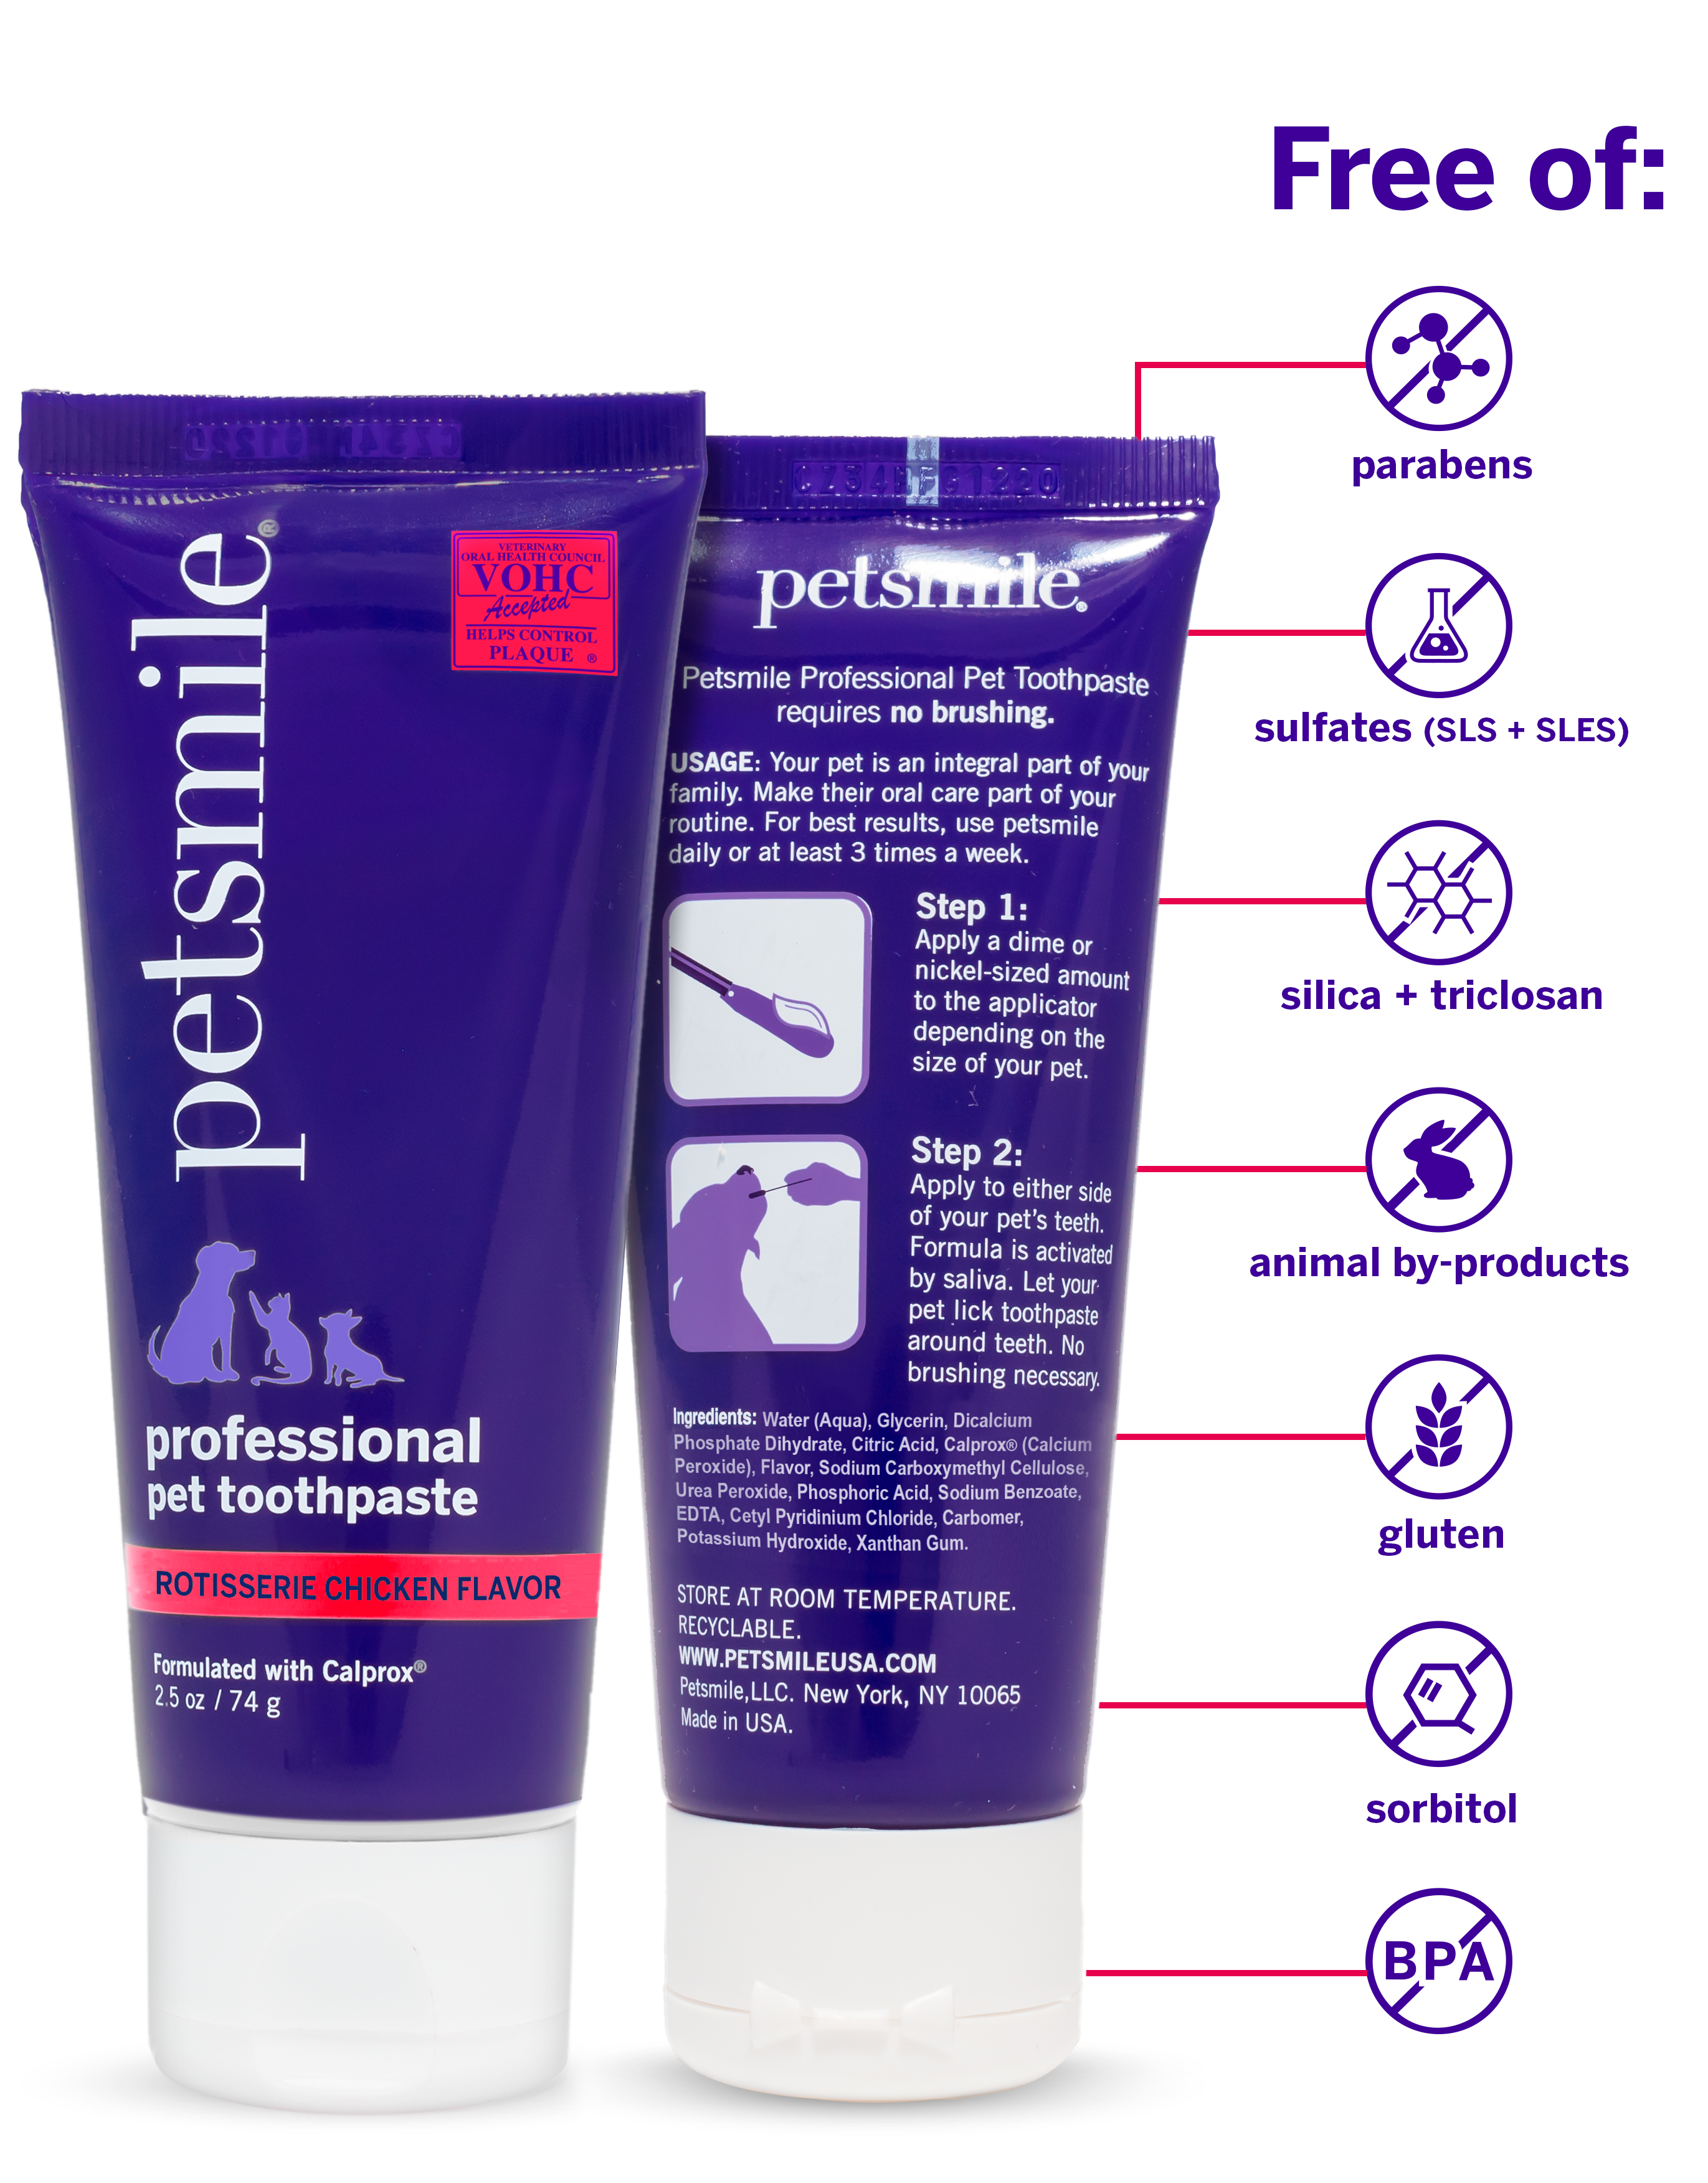 Improved dental health, fresher breath , Small tube of Roisserie Chicken flavor , Small purple tube of petsmile cat toothpaste , BPA-free, vegan, VOHC certified , 2.5 OZ of Roisserie Chicken flavor cat toothpaste